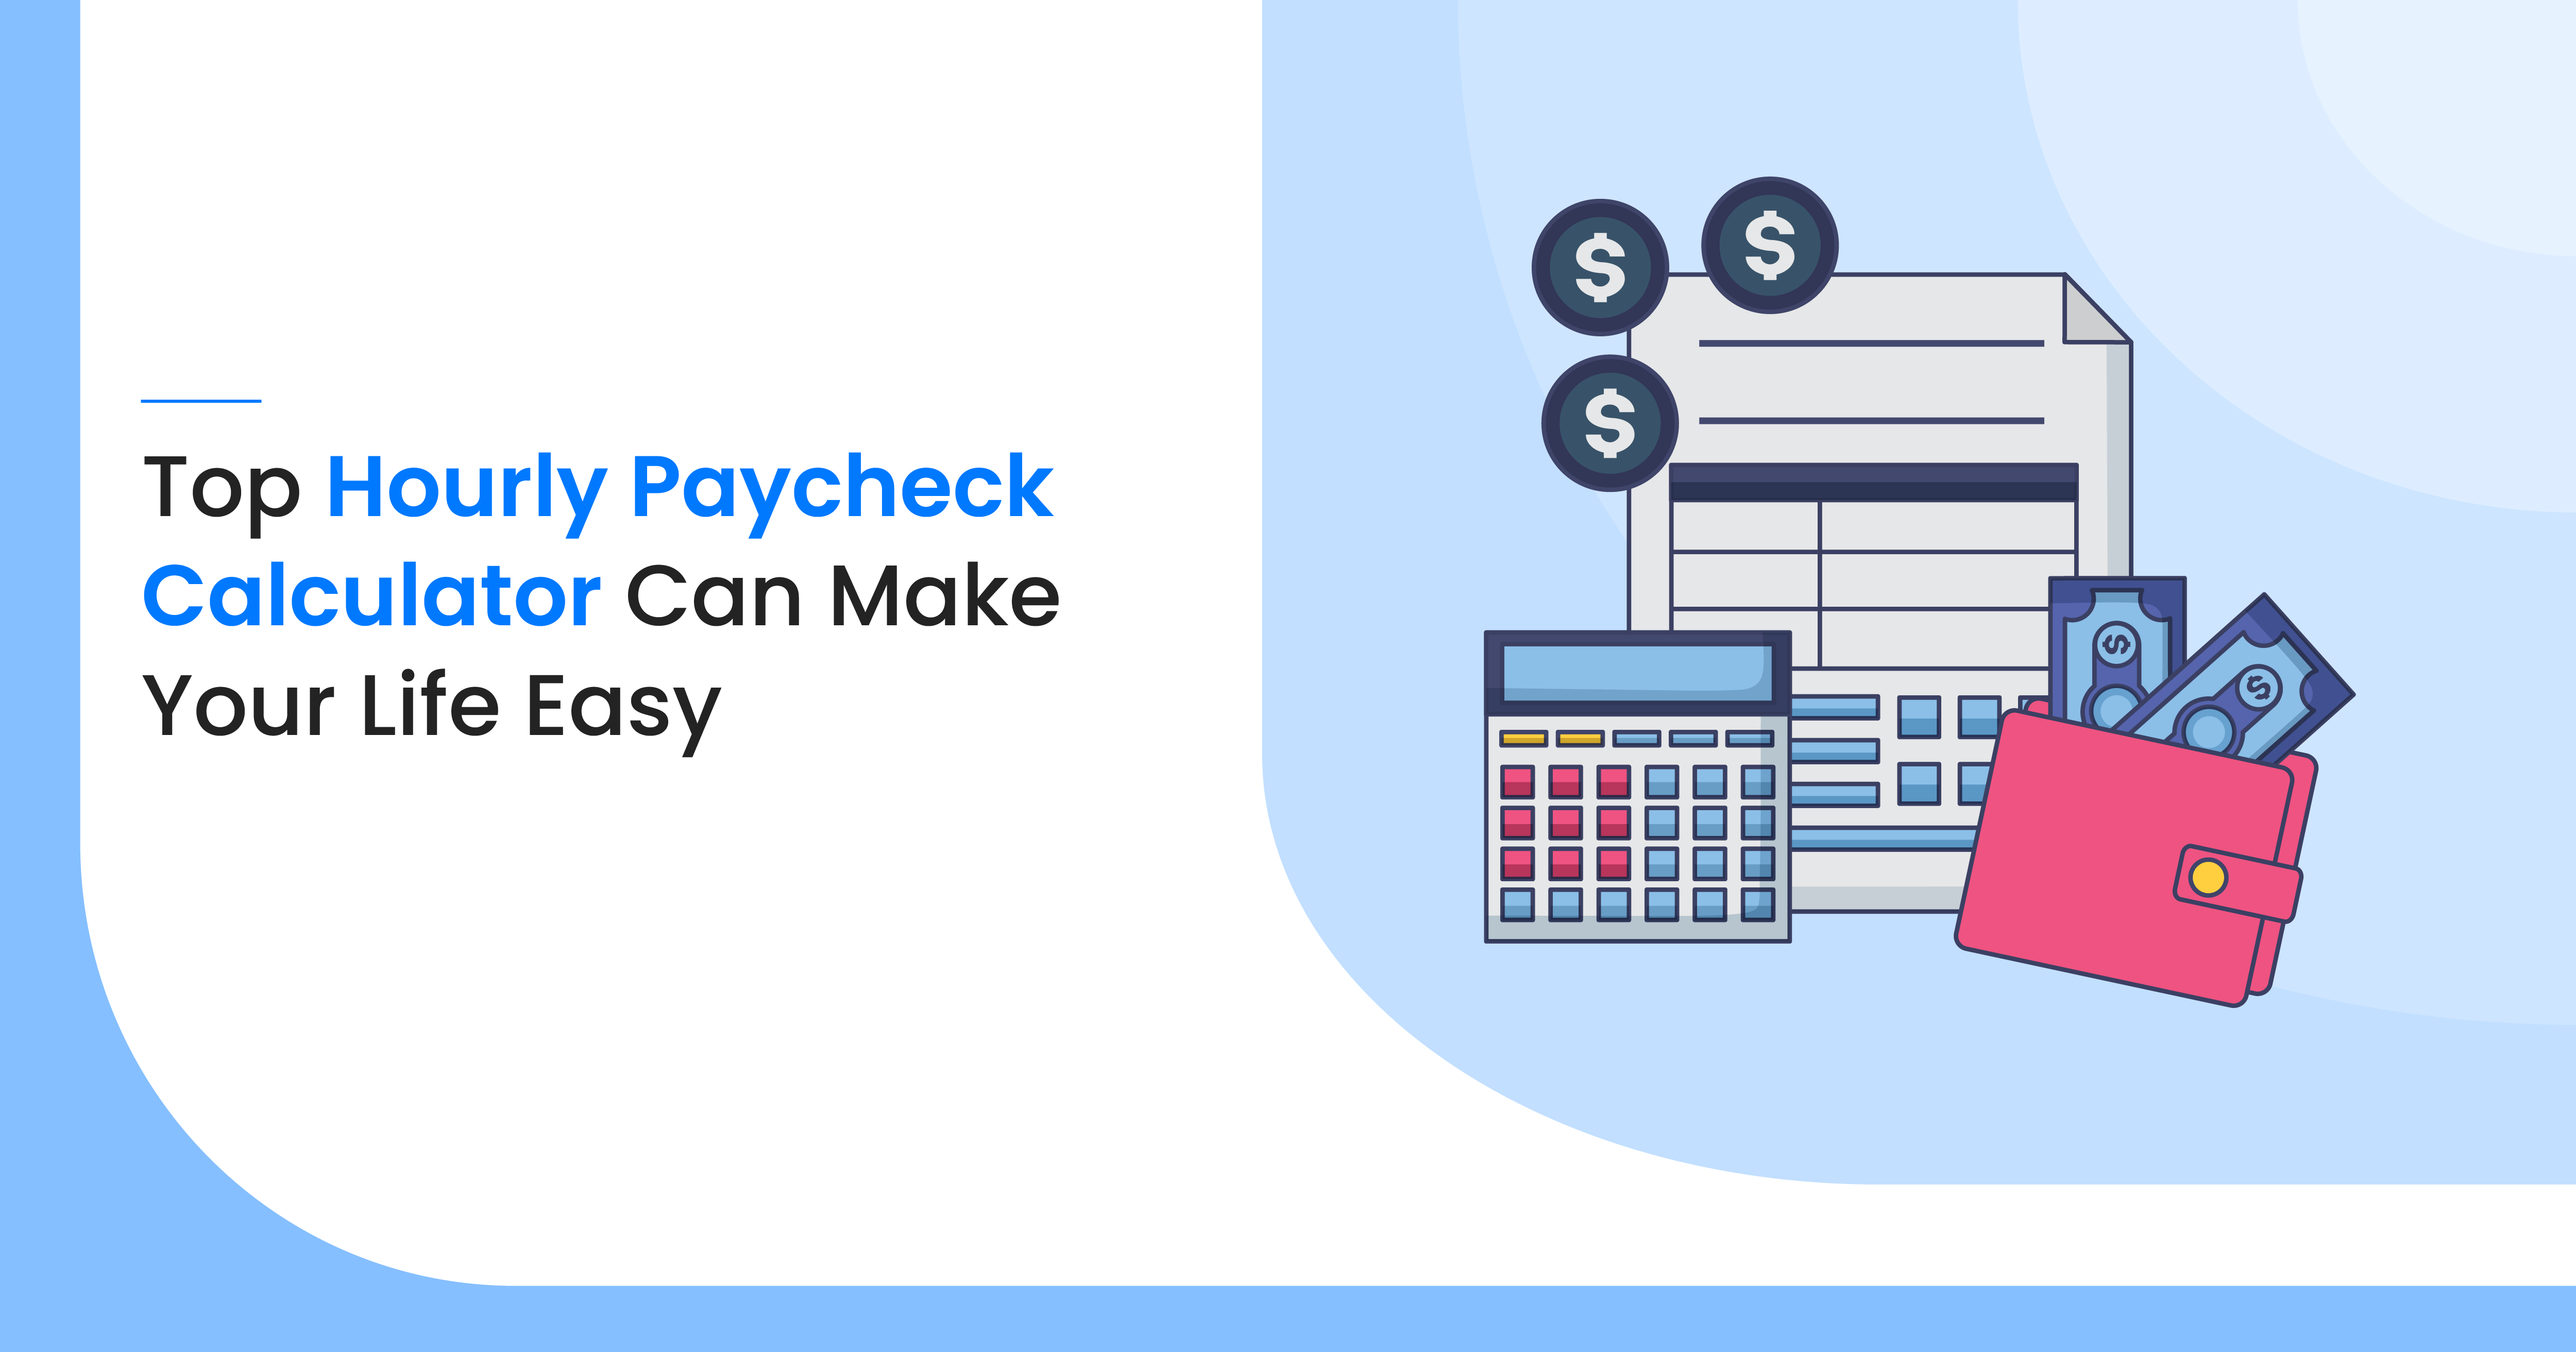 Top 5 Hourly Paycheck Calculator Can Make Your Life Easy